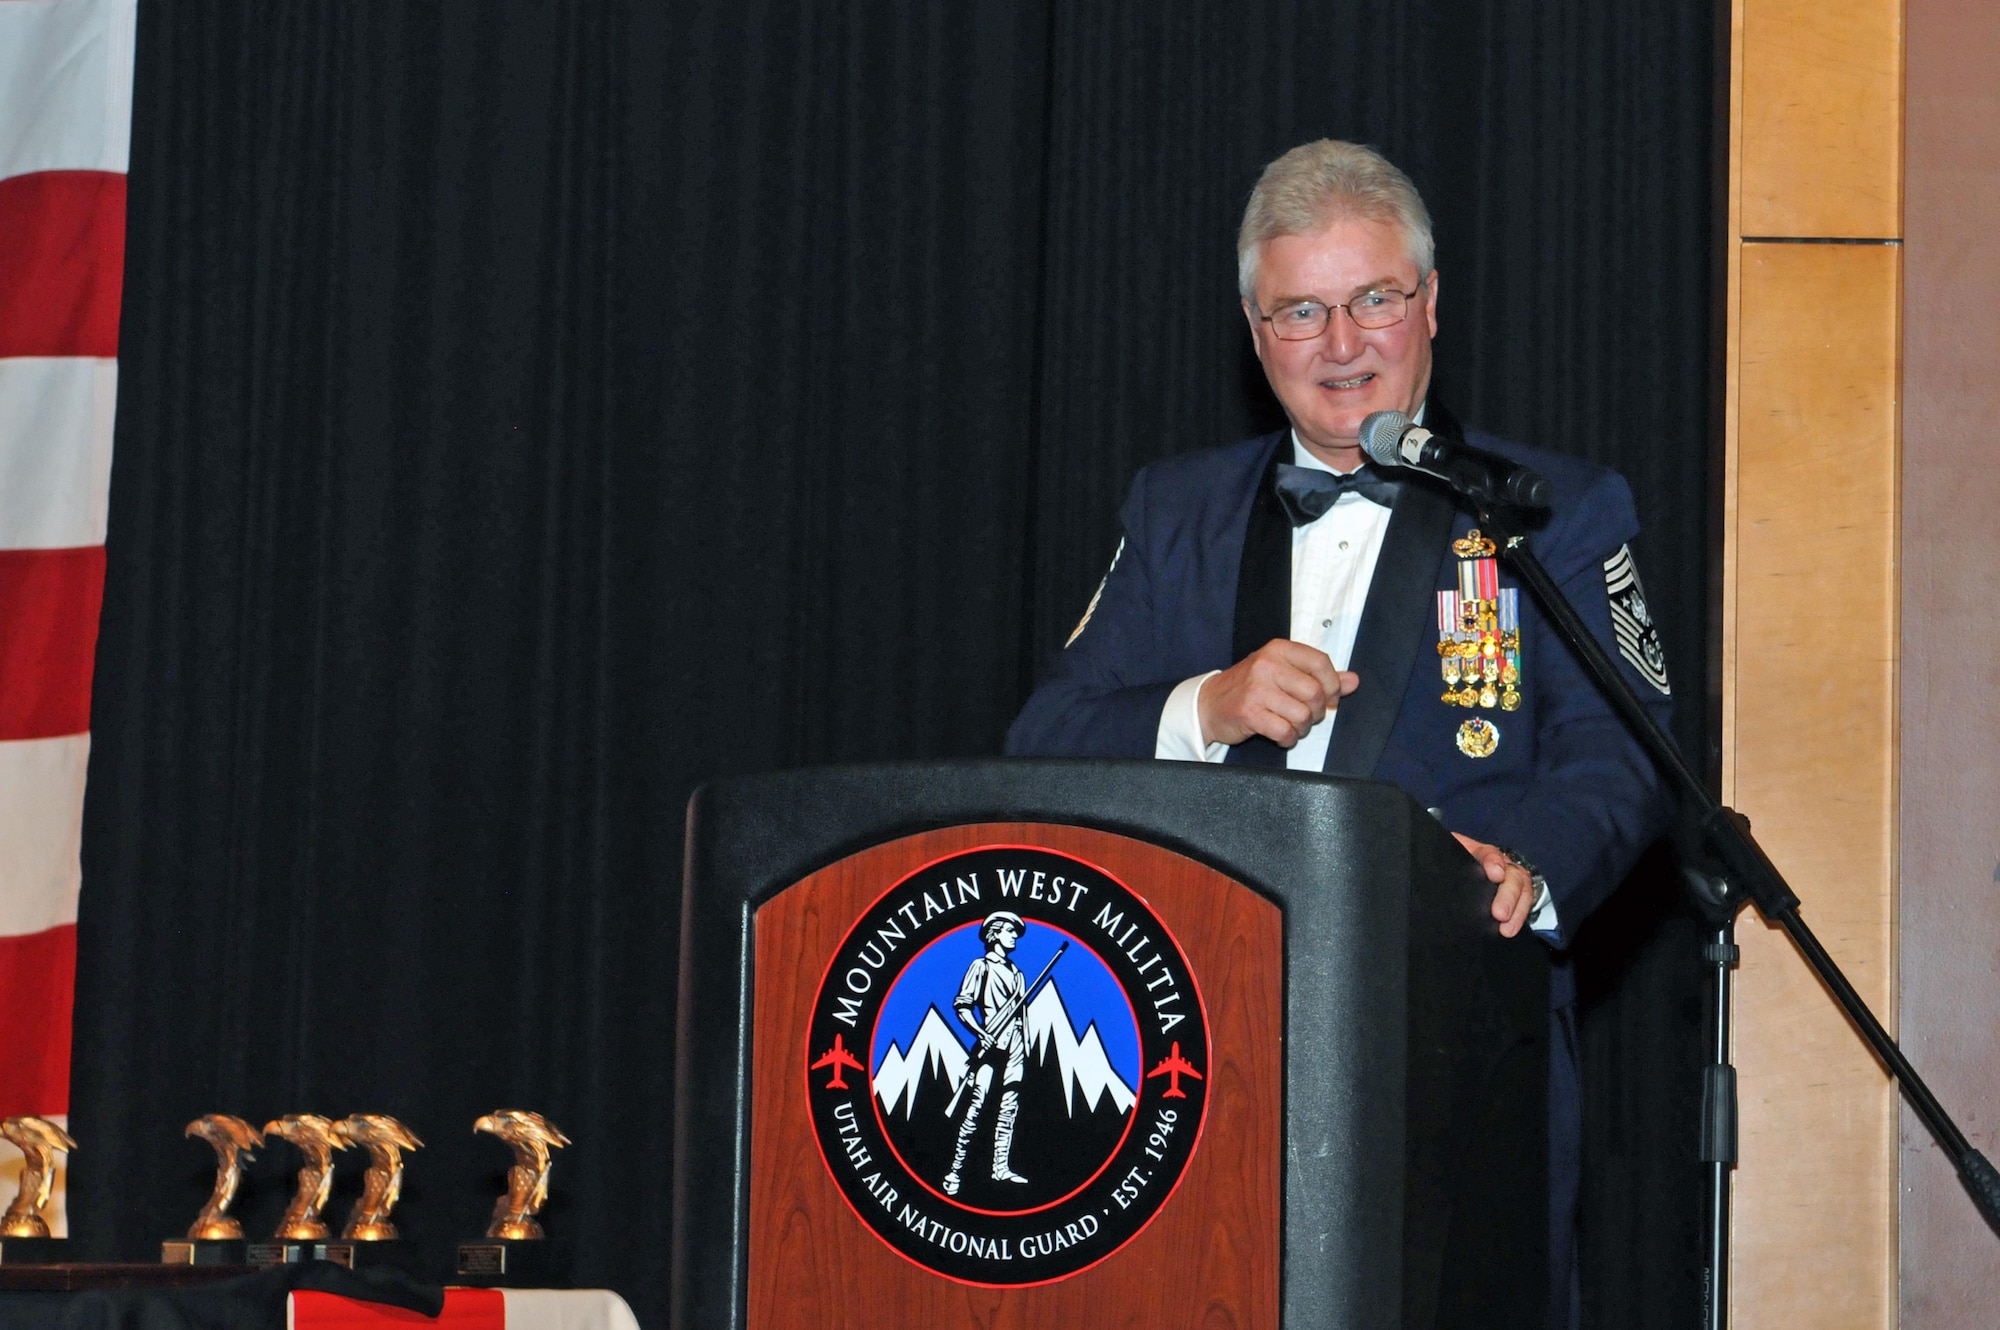 Retired Chief Master Sergeant of the Air Force Gerald R. Murray addresses an audience of nearly 230 military and civilian personnel at the 2016 Airman of the Year awards banquet held at the Utah Cultural Center in West Valley, Utah on Jan. 21, 2017. (U.S. Air National Guard photo by Tech. Sgt. Annie Edwards)